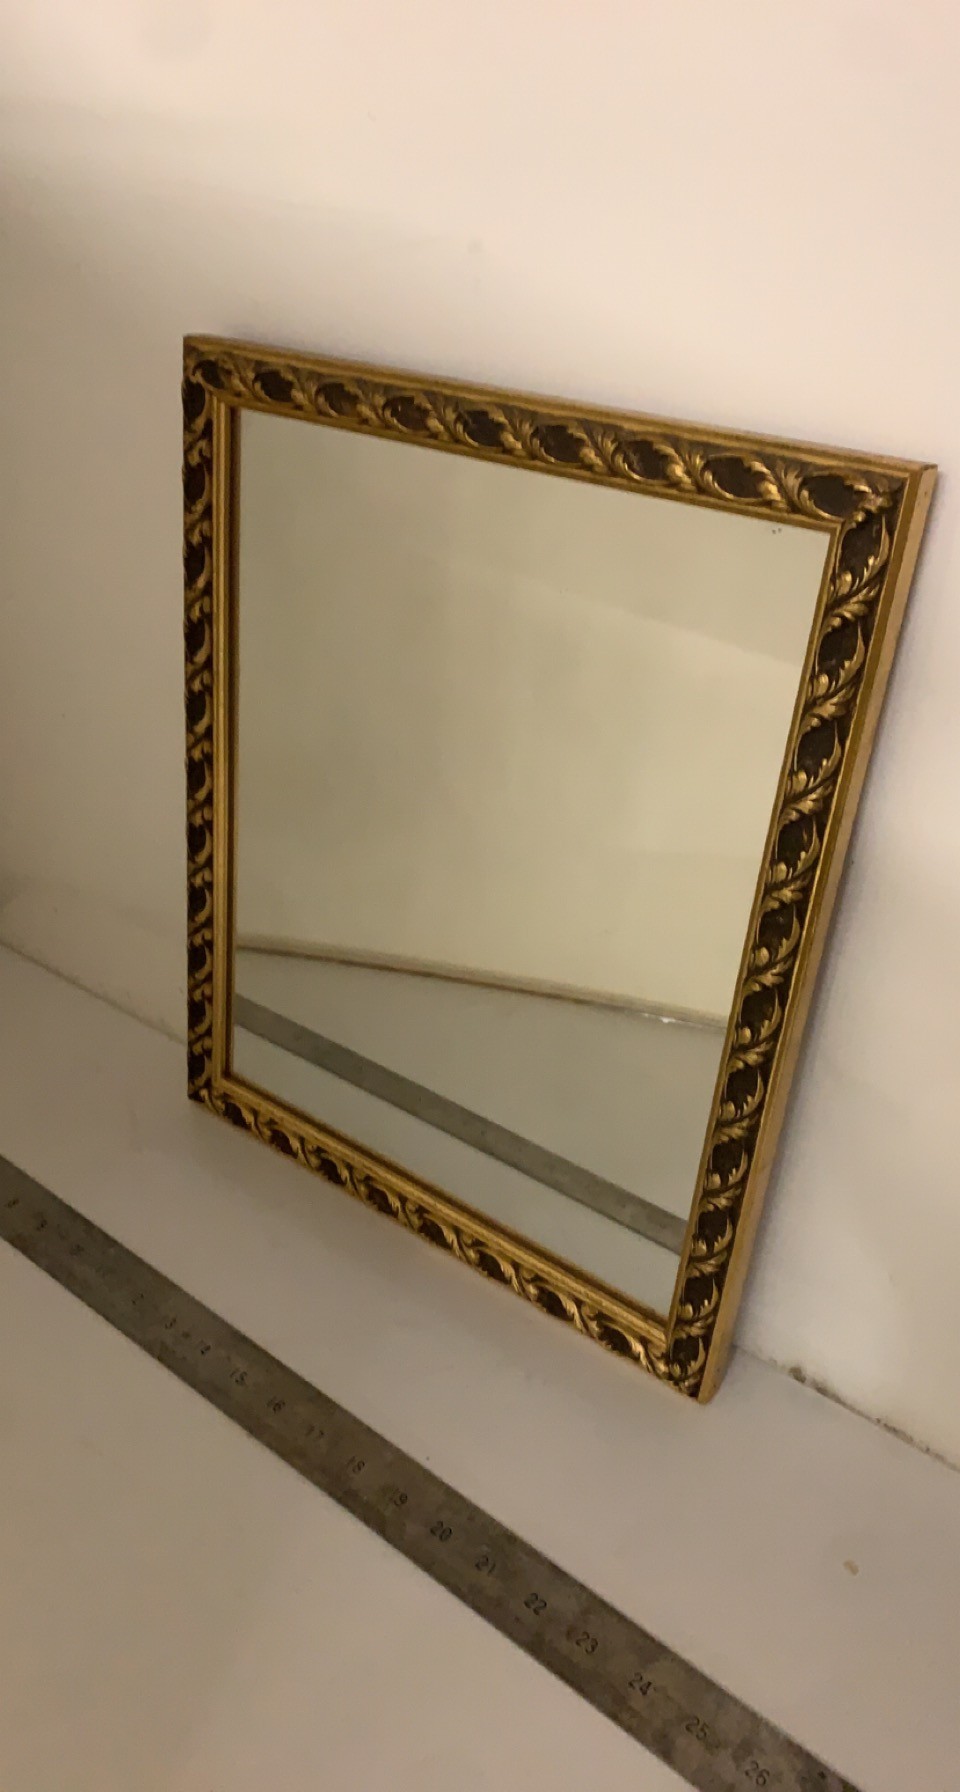 Small gold framed mirror - Image 2 of 2